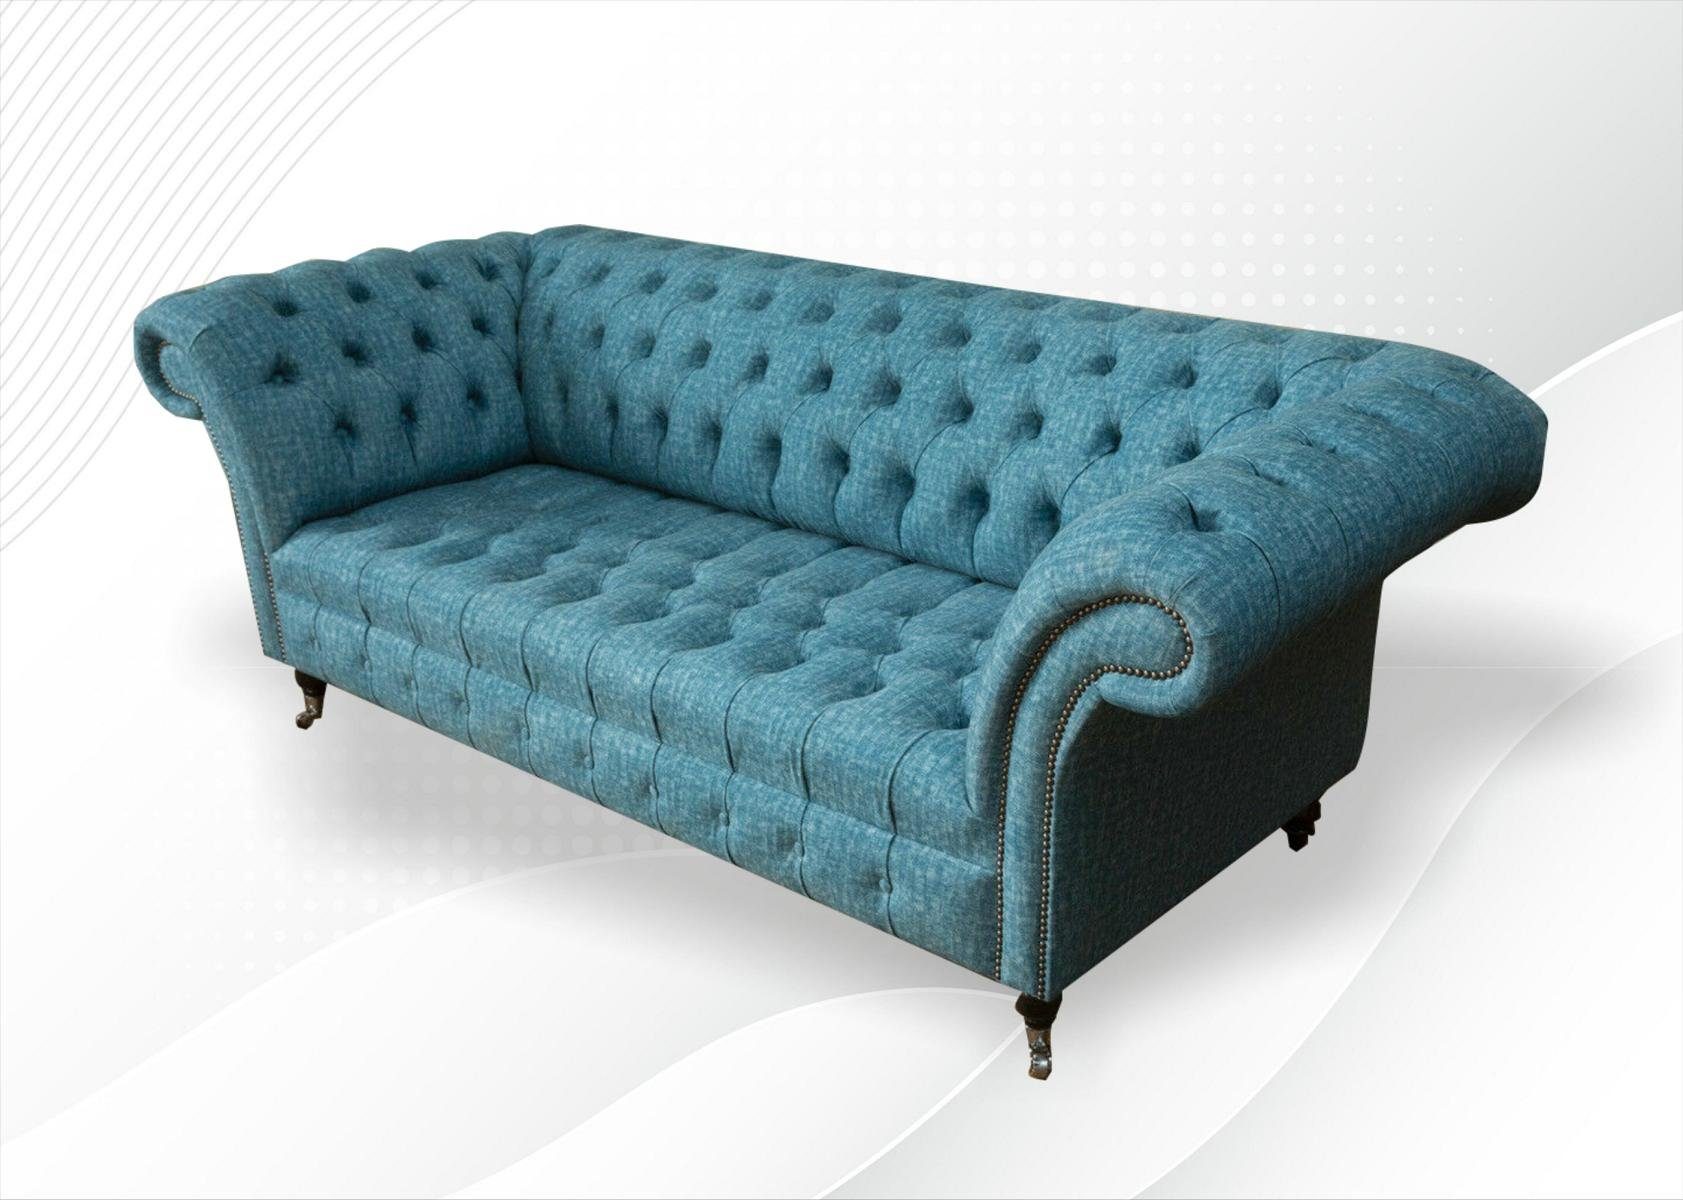 Polstersofa Blaue Sofa, Chesterfield Europe JVmoebel Made in Couch luxus Moderne Sofa